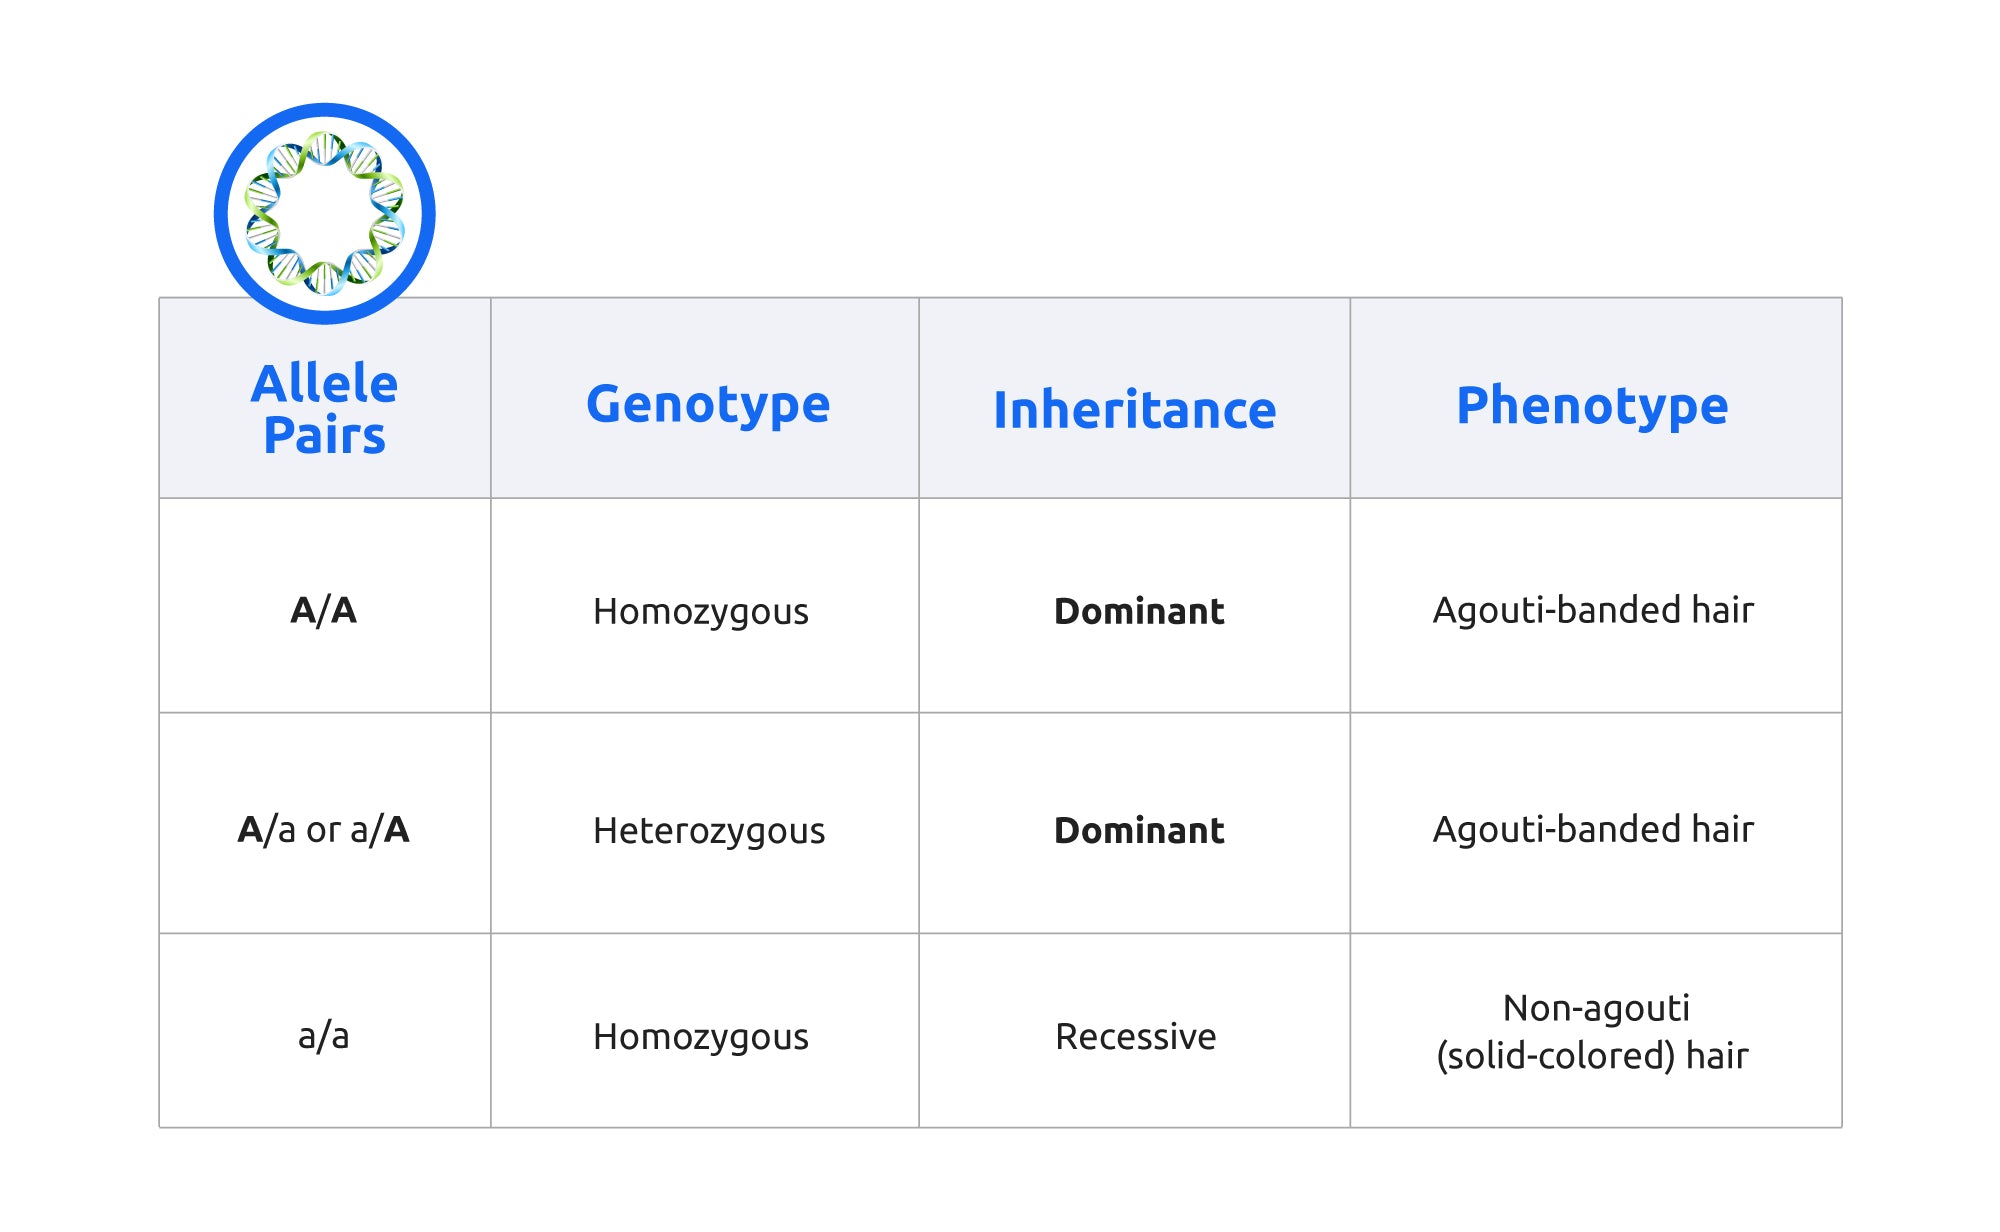 Table 1. Allele pairs, genotypes, and genetic inheritance patterns for agouti and non-agouti banded hair in cat coats.